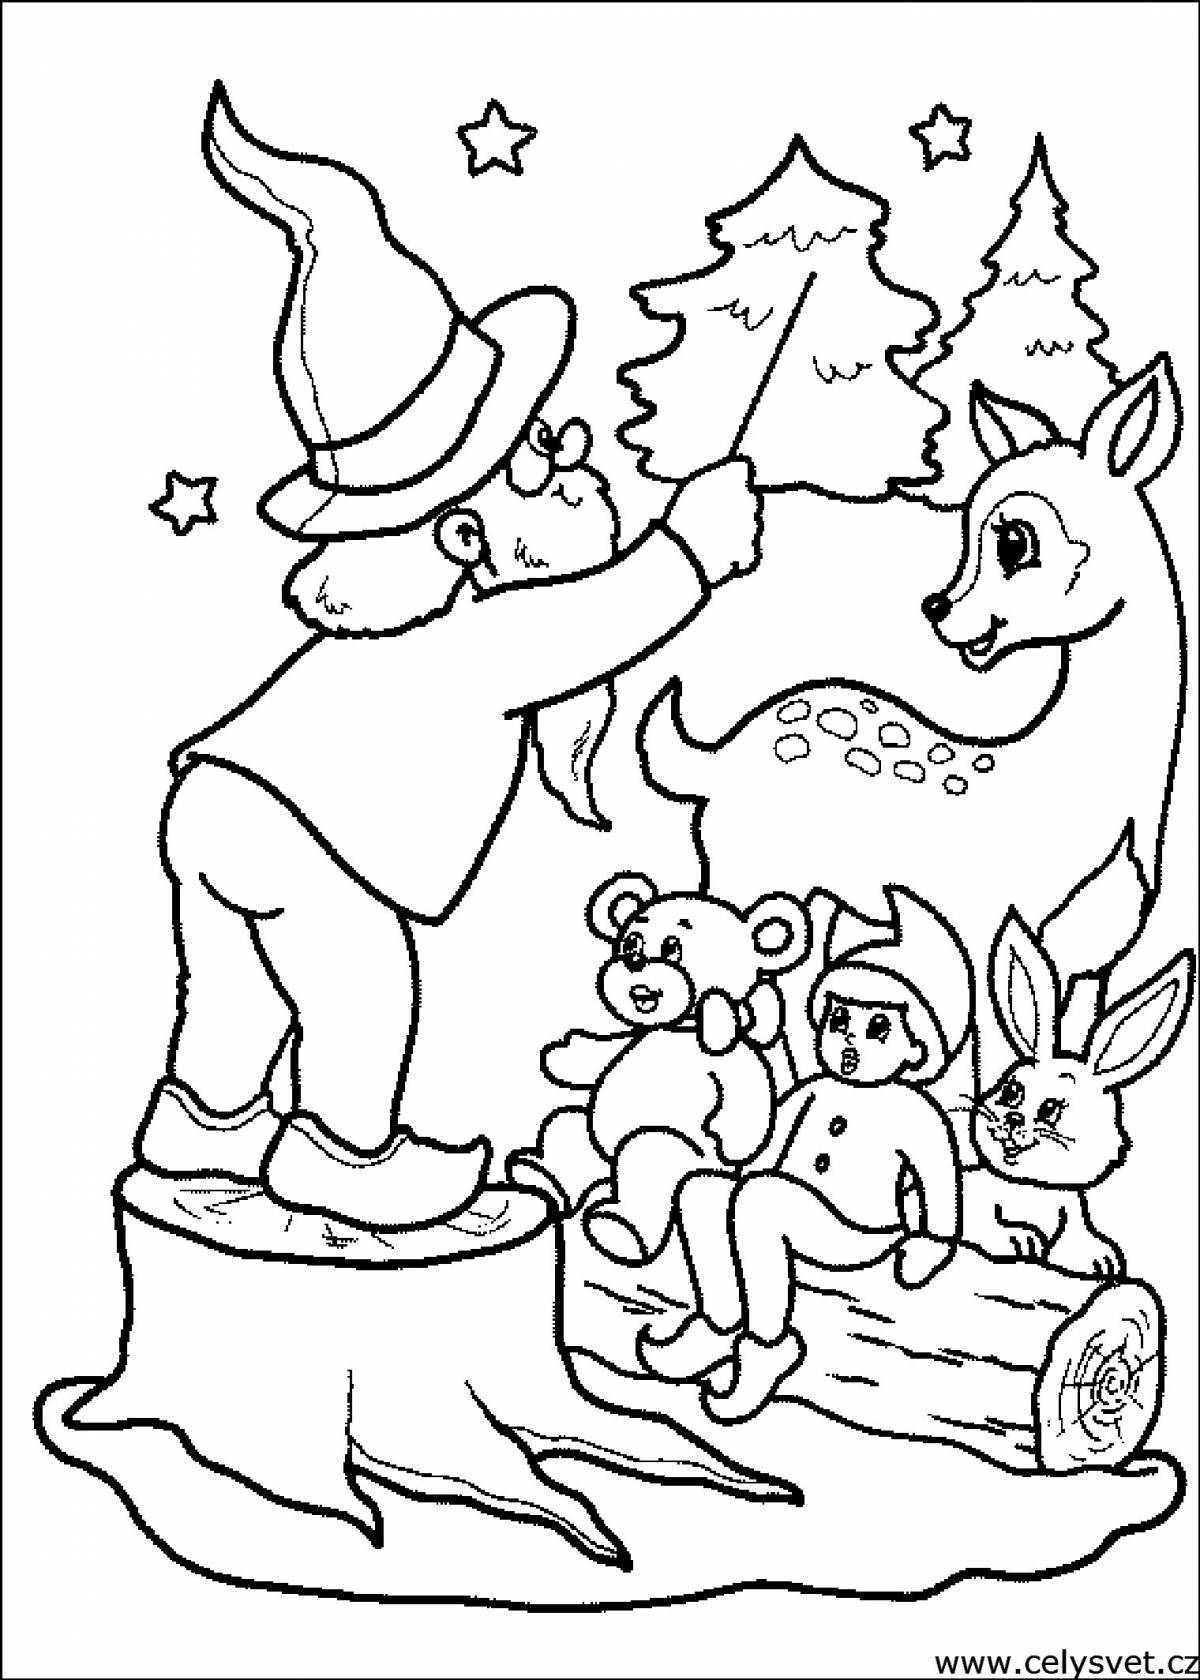 Colorful Christmas story coloring book